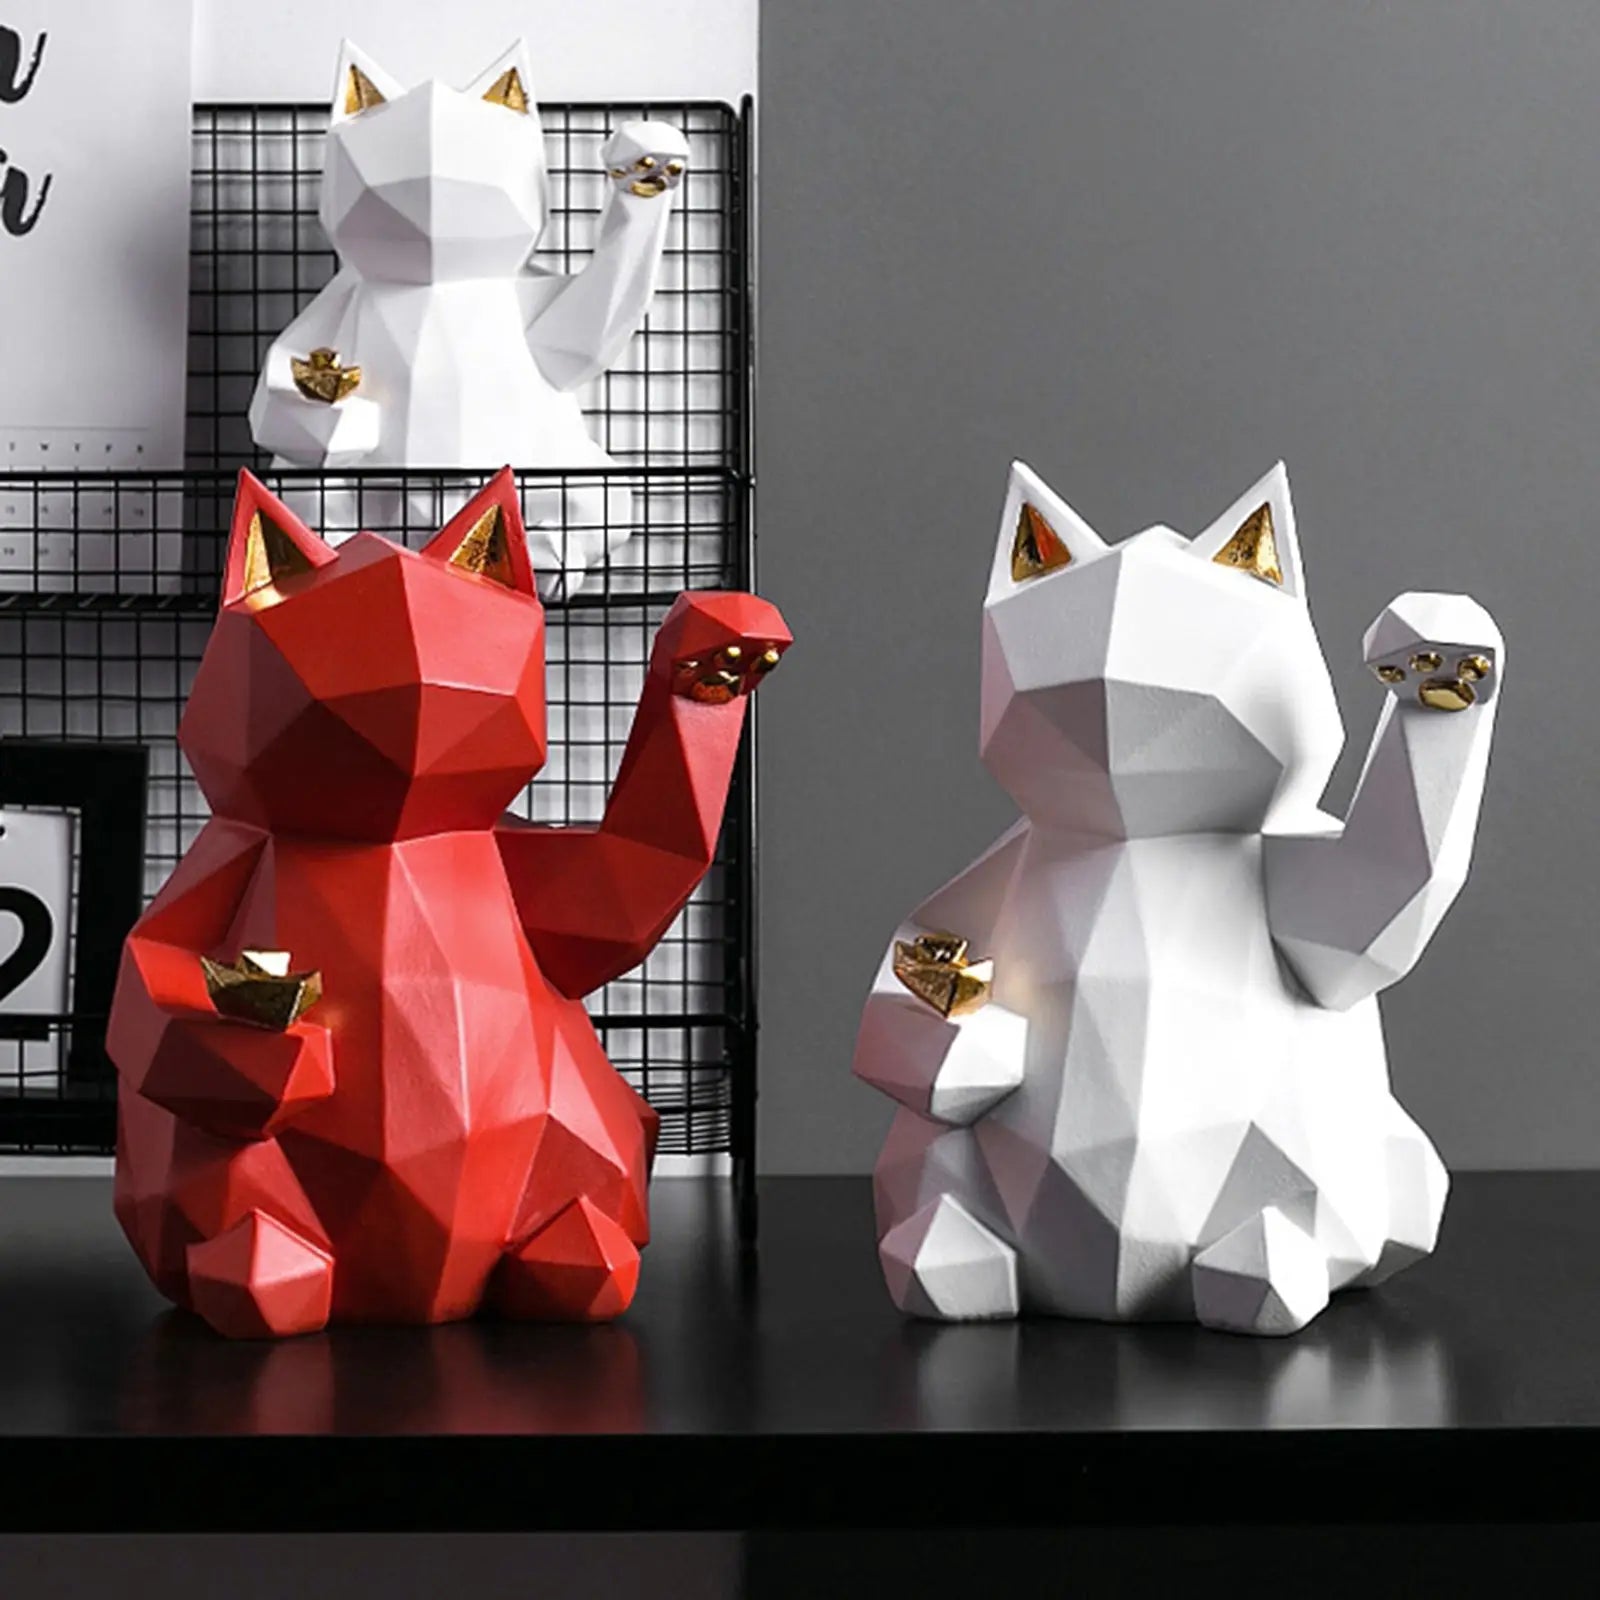 Red Origami Sculpture Lucky Cat